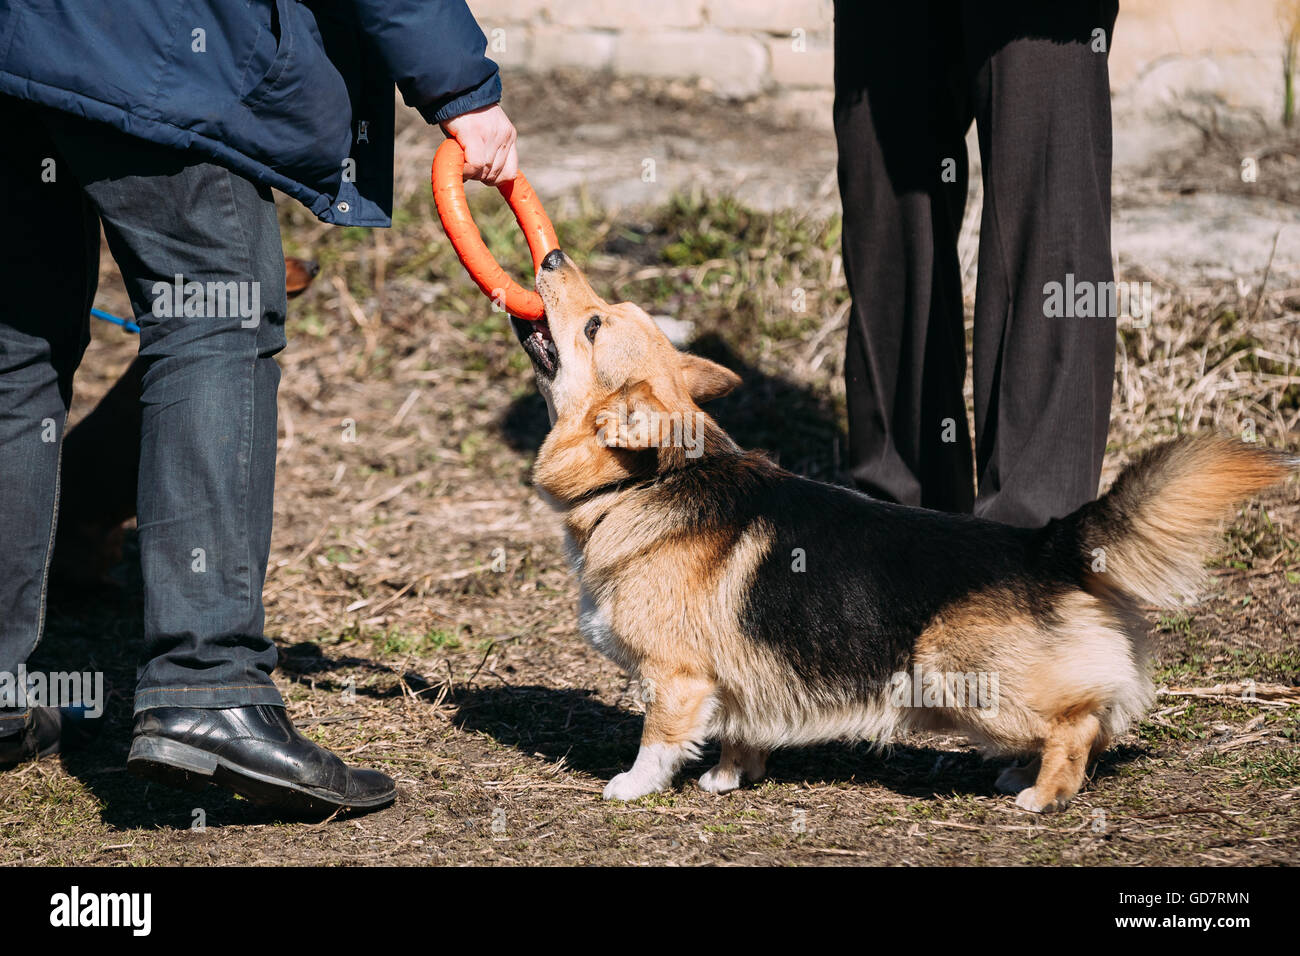 Funny Welsh Corgi Dog Play Outdoor. The Welsh Corgi Is A Small Type Of Herding Dog That Originated In Wales. Stock Photo